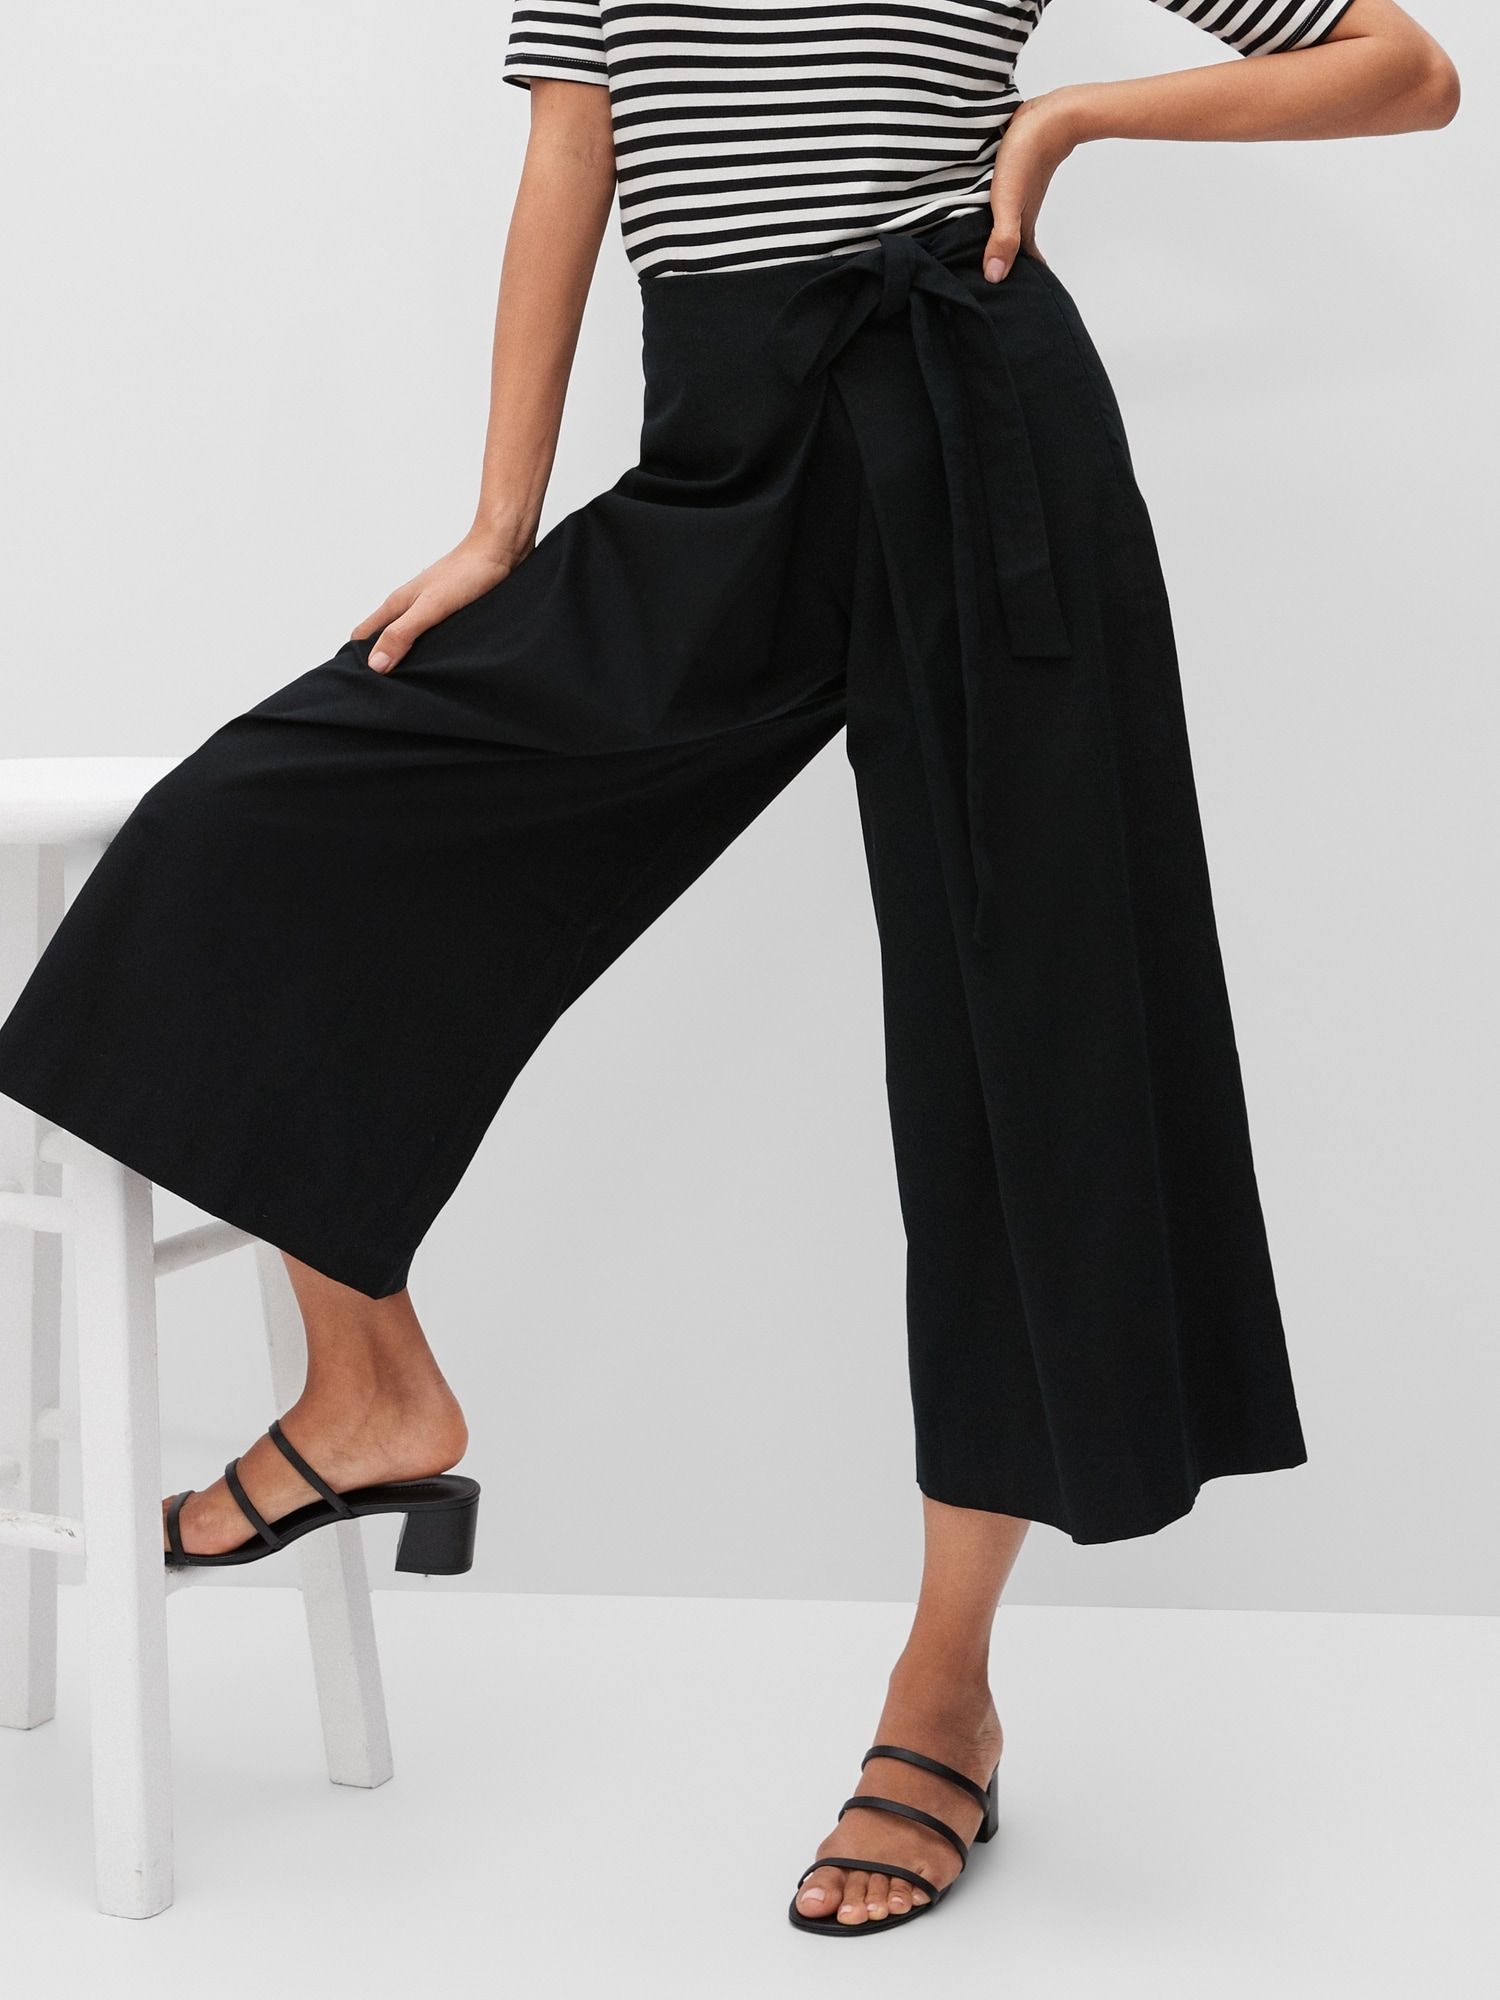 Made with Organically Grown Cotton Wide-Leg Foldover Pant